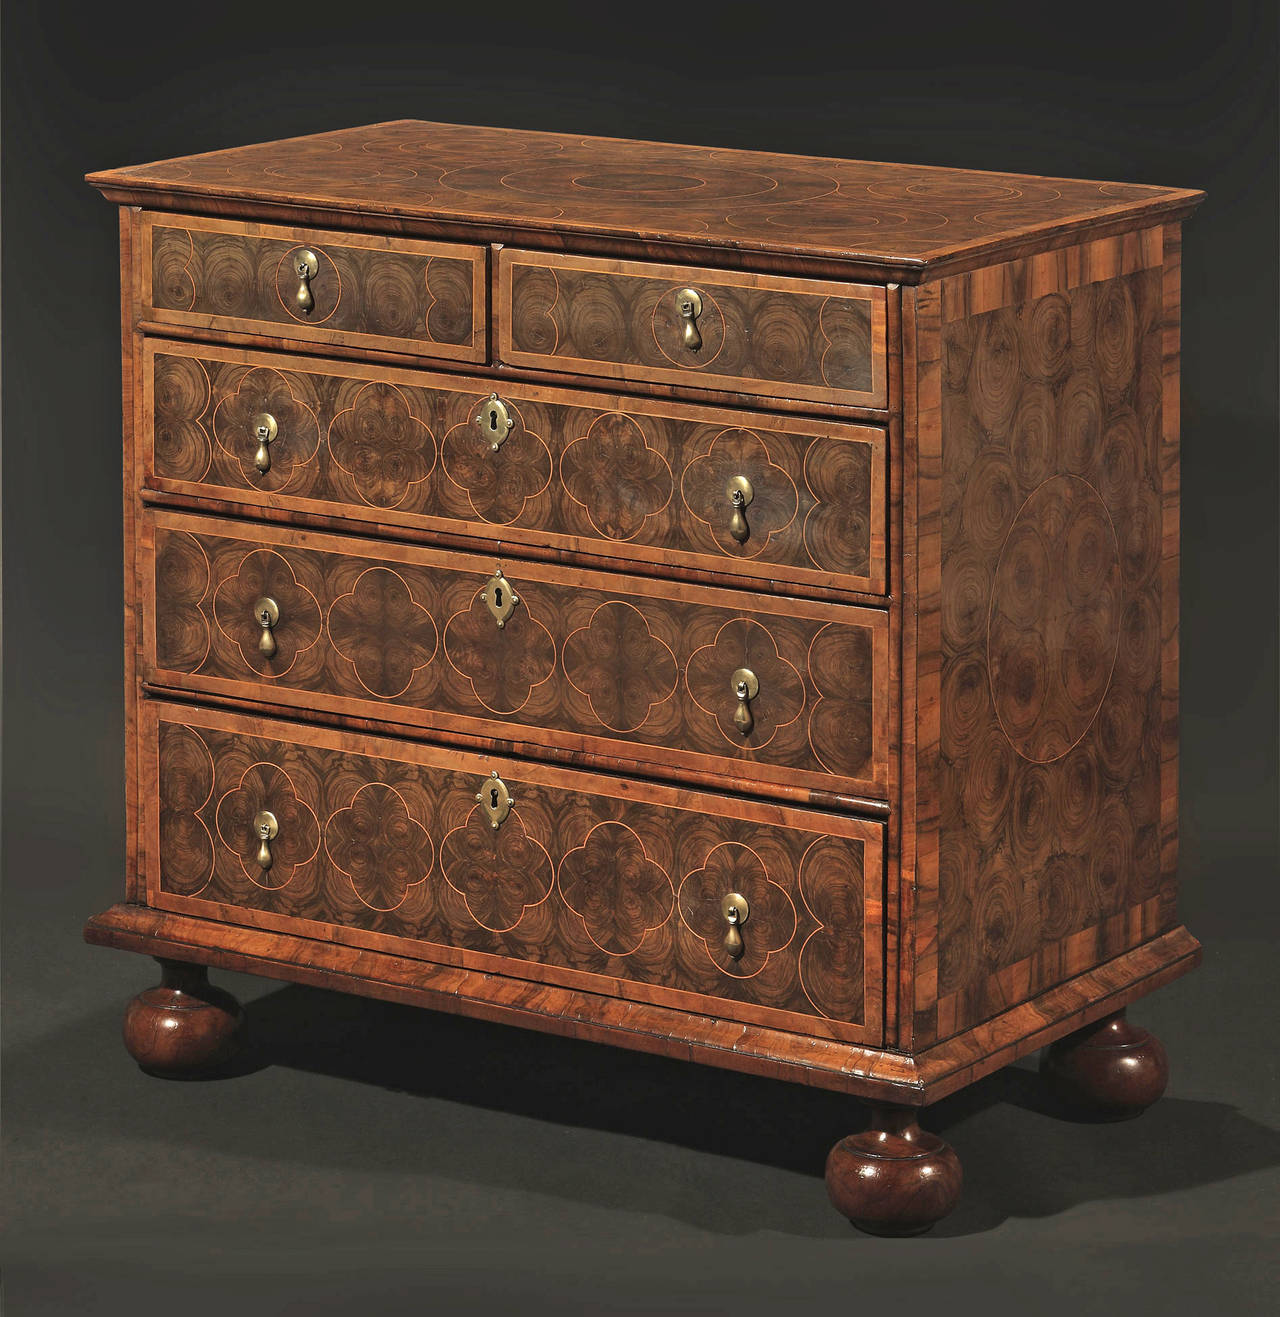 The rectangular top inlaid with sycamore concentric circular line inlay, over two short and three long graduated drawers, on bun feet; with walnut crossbanding throughout; replaced hardware.